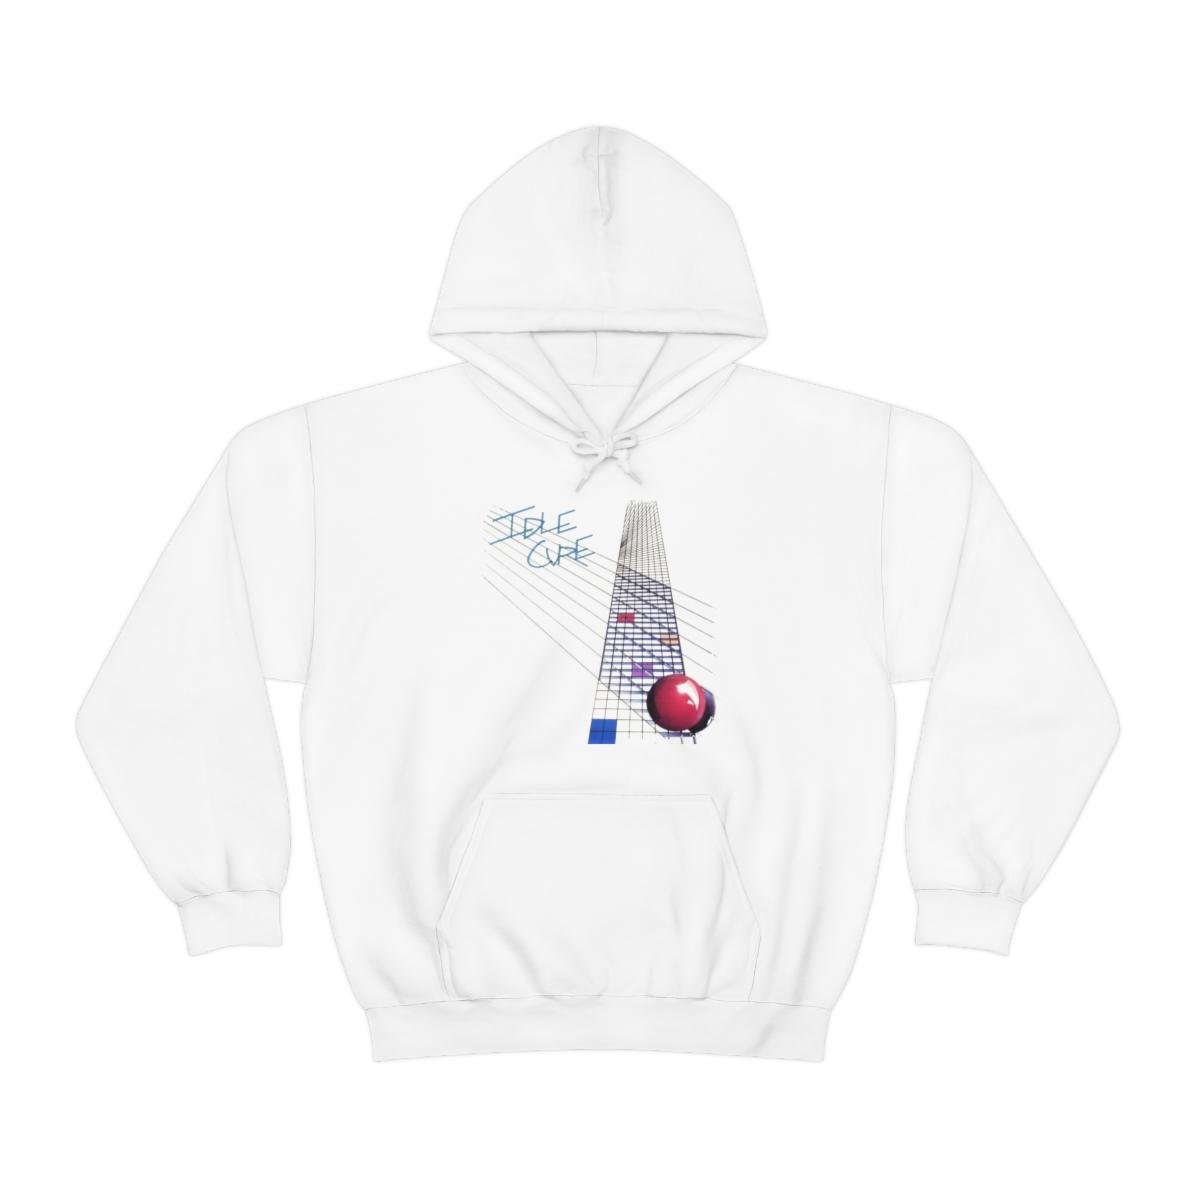 Idle Cure Pullover Hooded Sweatshirt